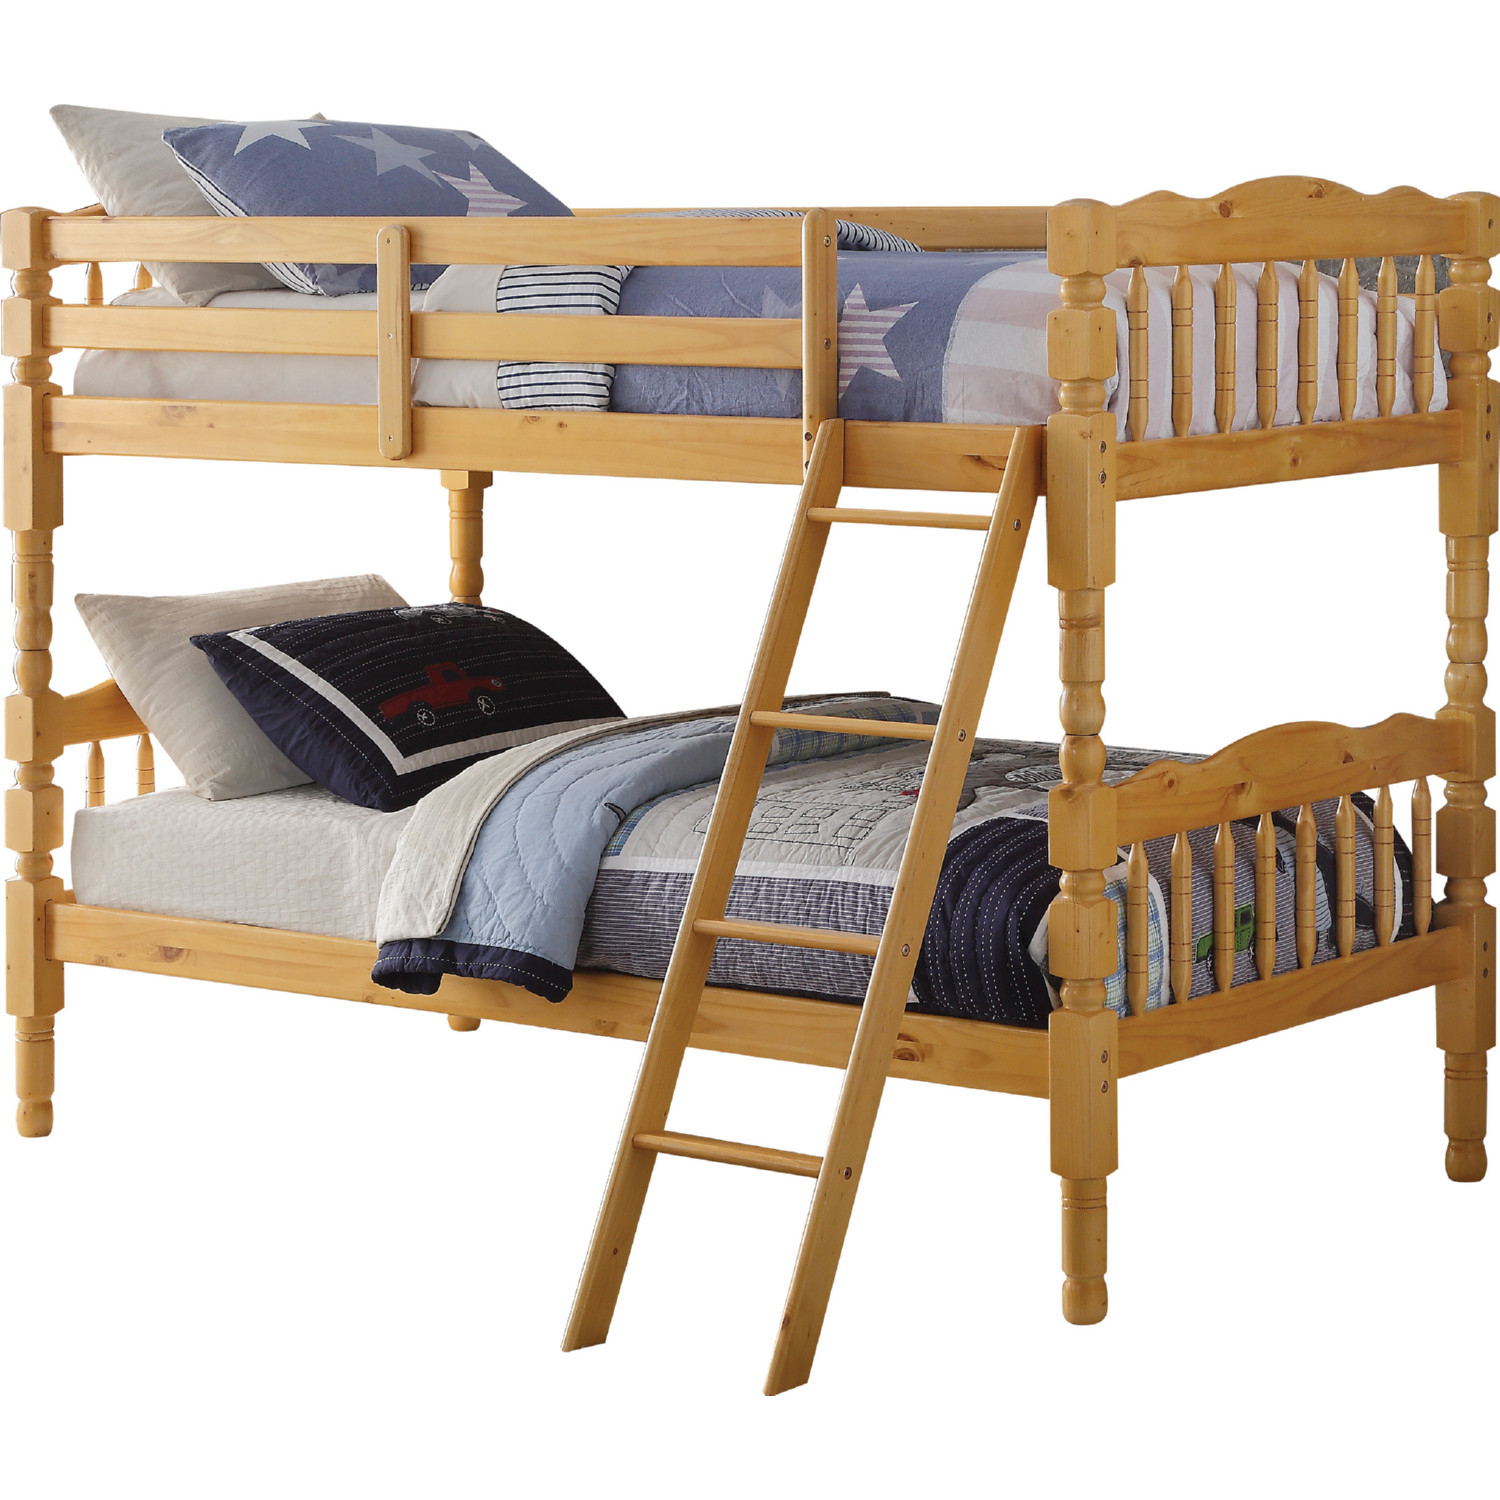 81" X 43" X 60" Twin Over Twin Natural Pine Wood Bunk Bed